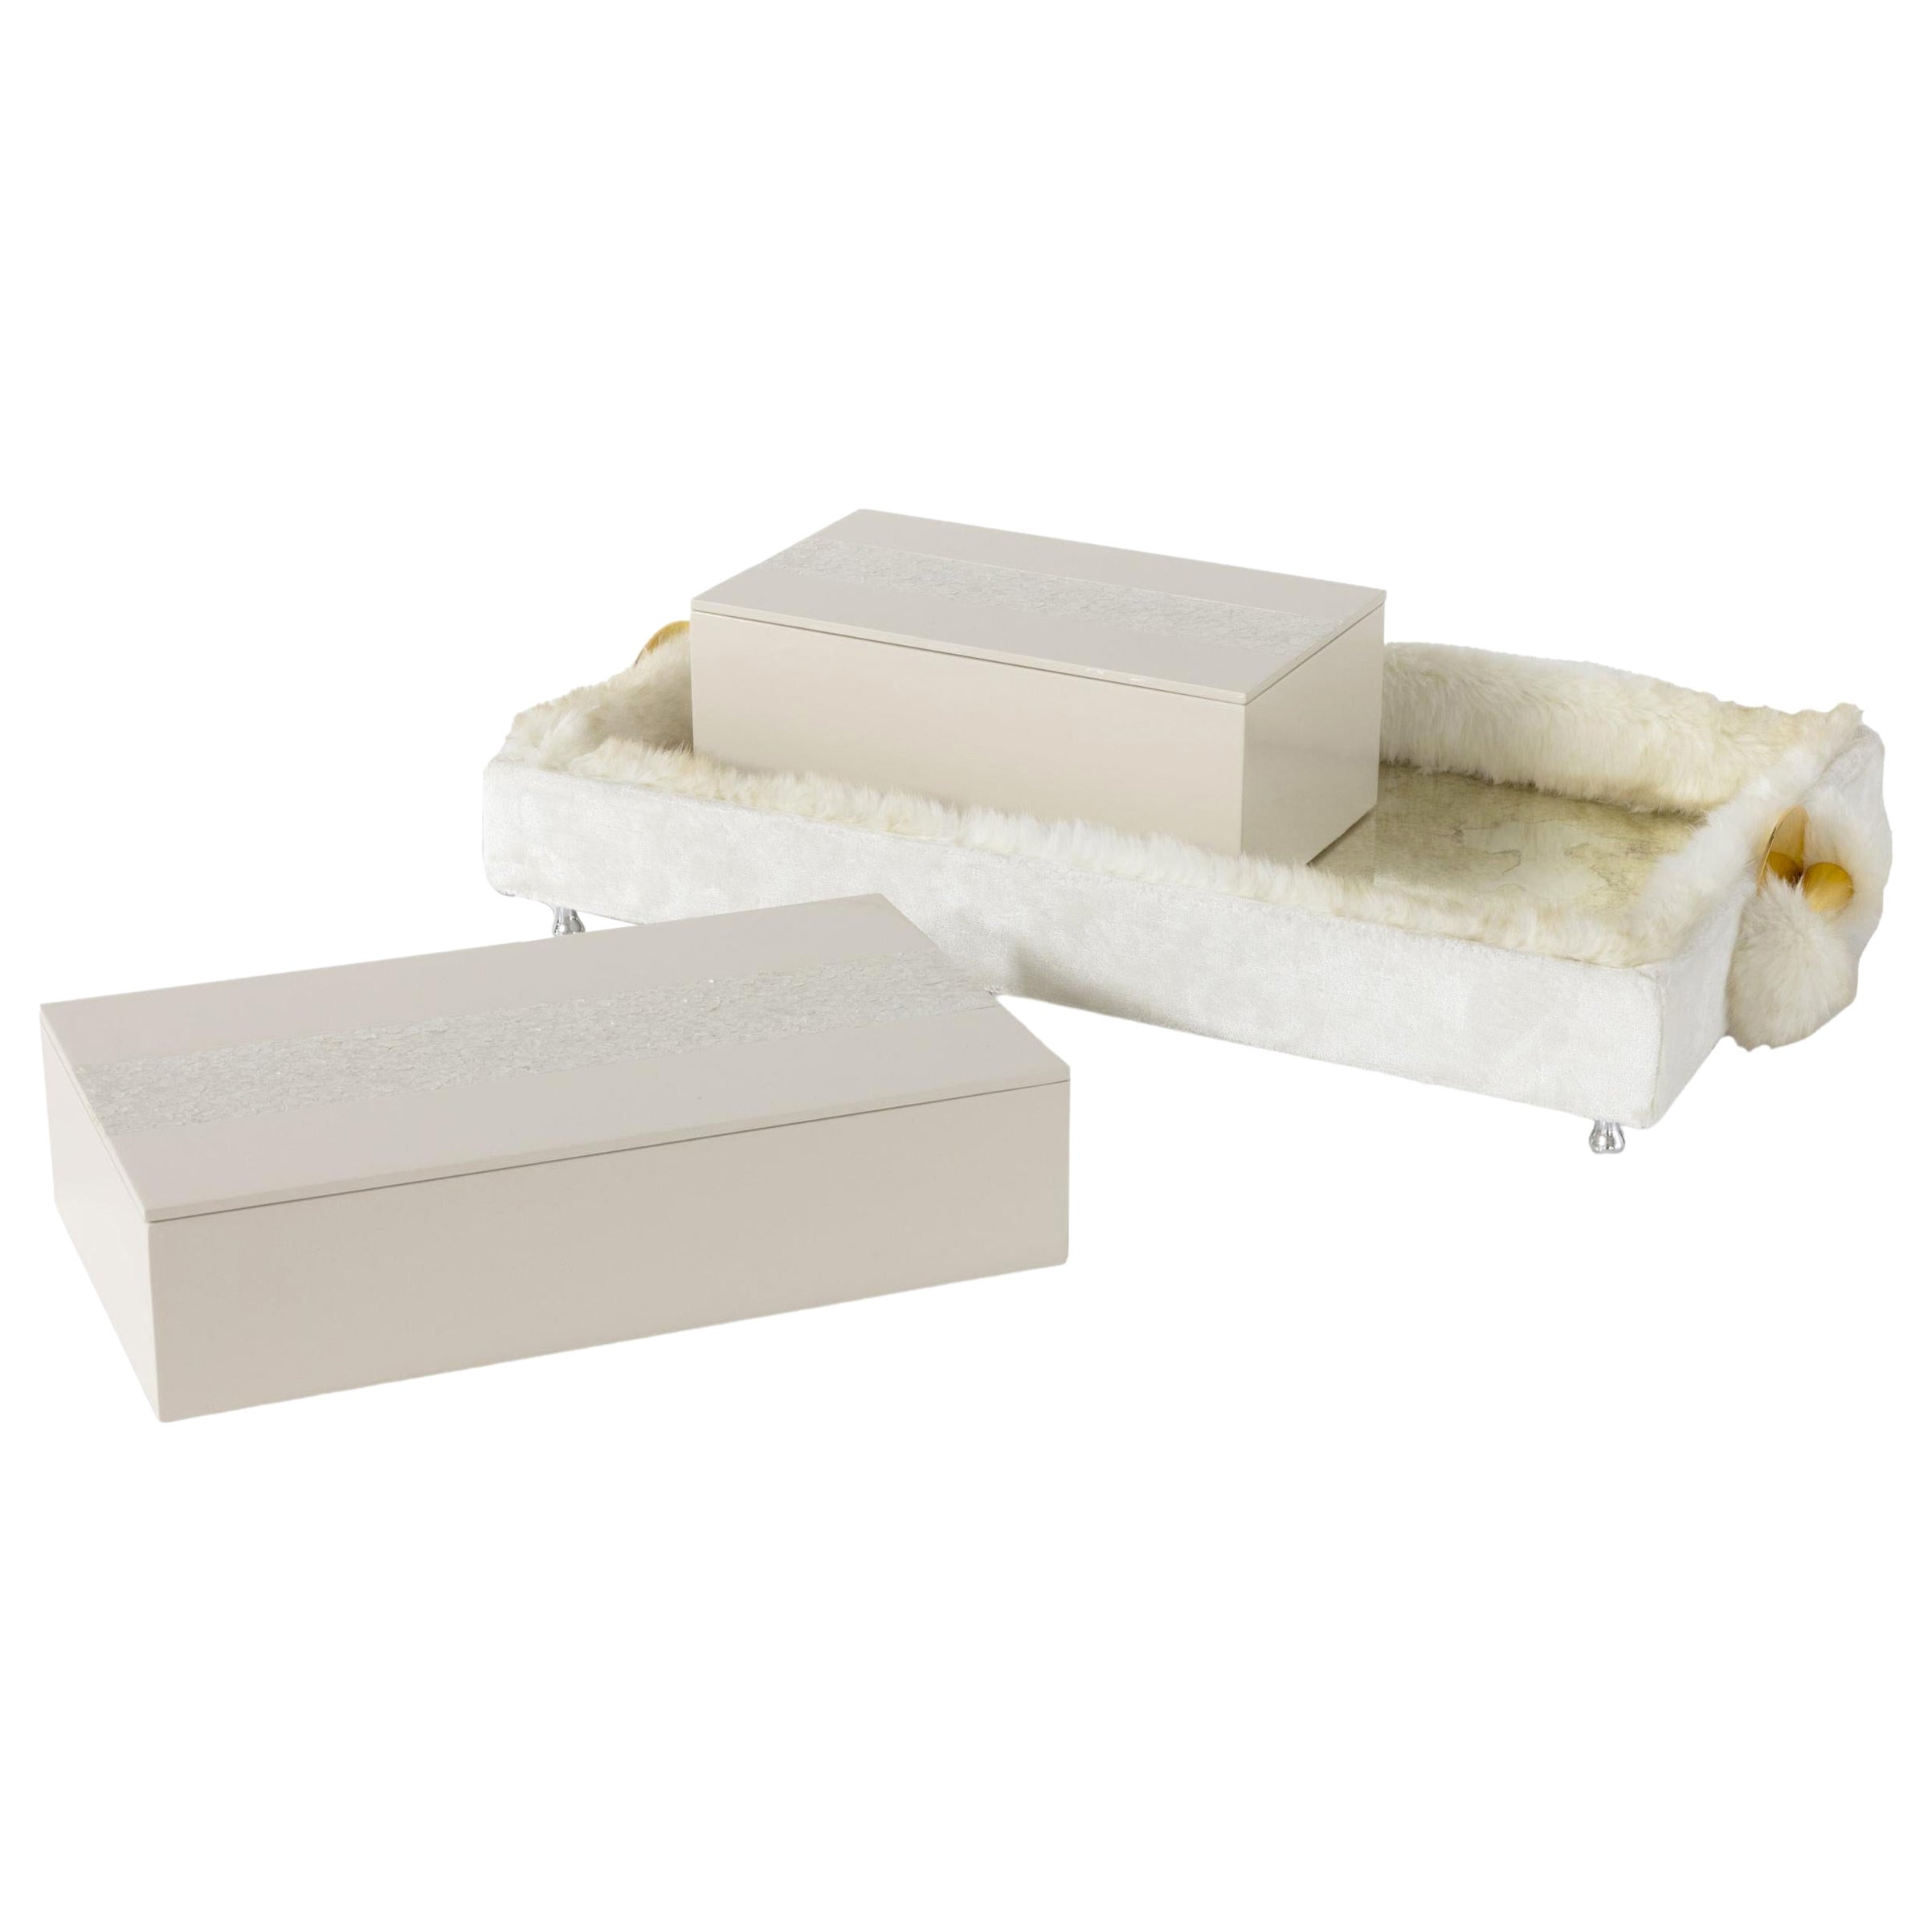 Set/3 Decorative Boxes and Tray, Cream, Handmade in Portugal by Lusitanus Home